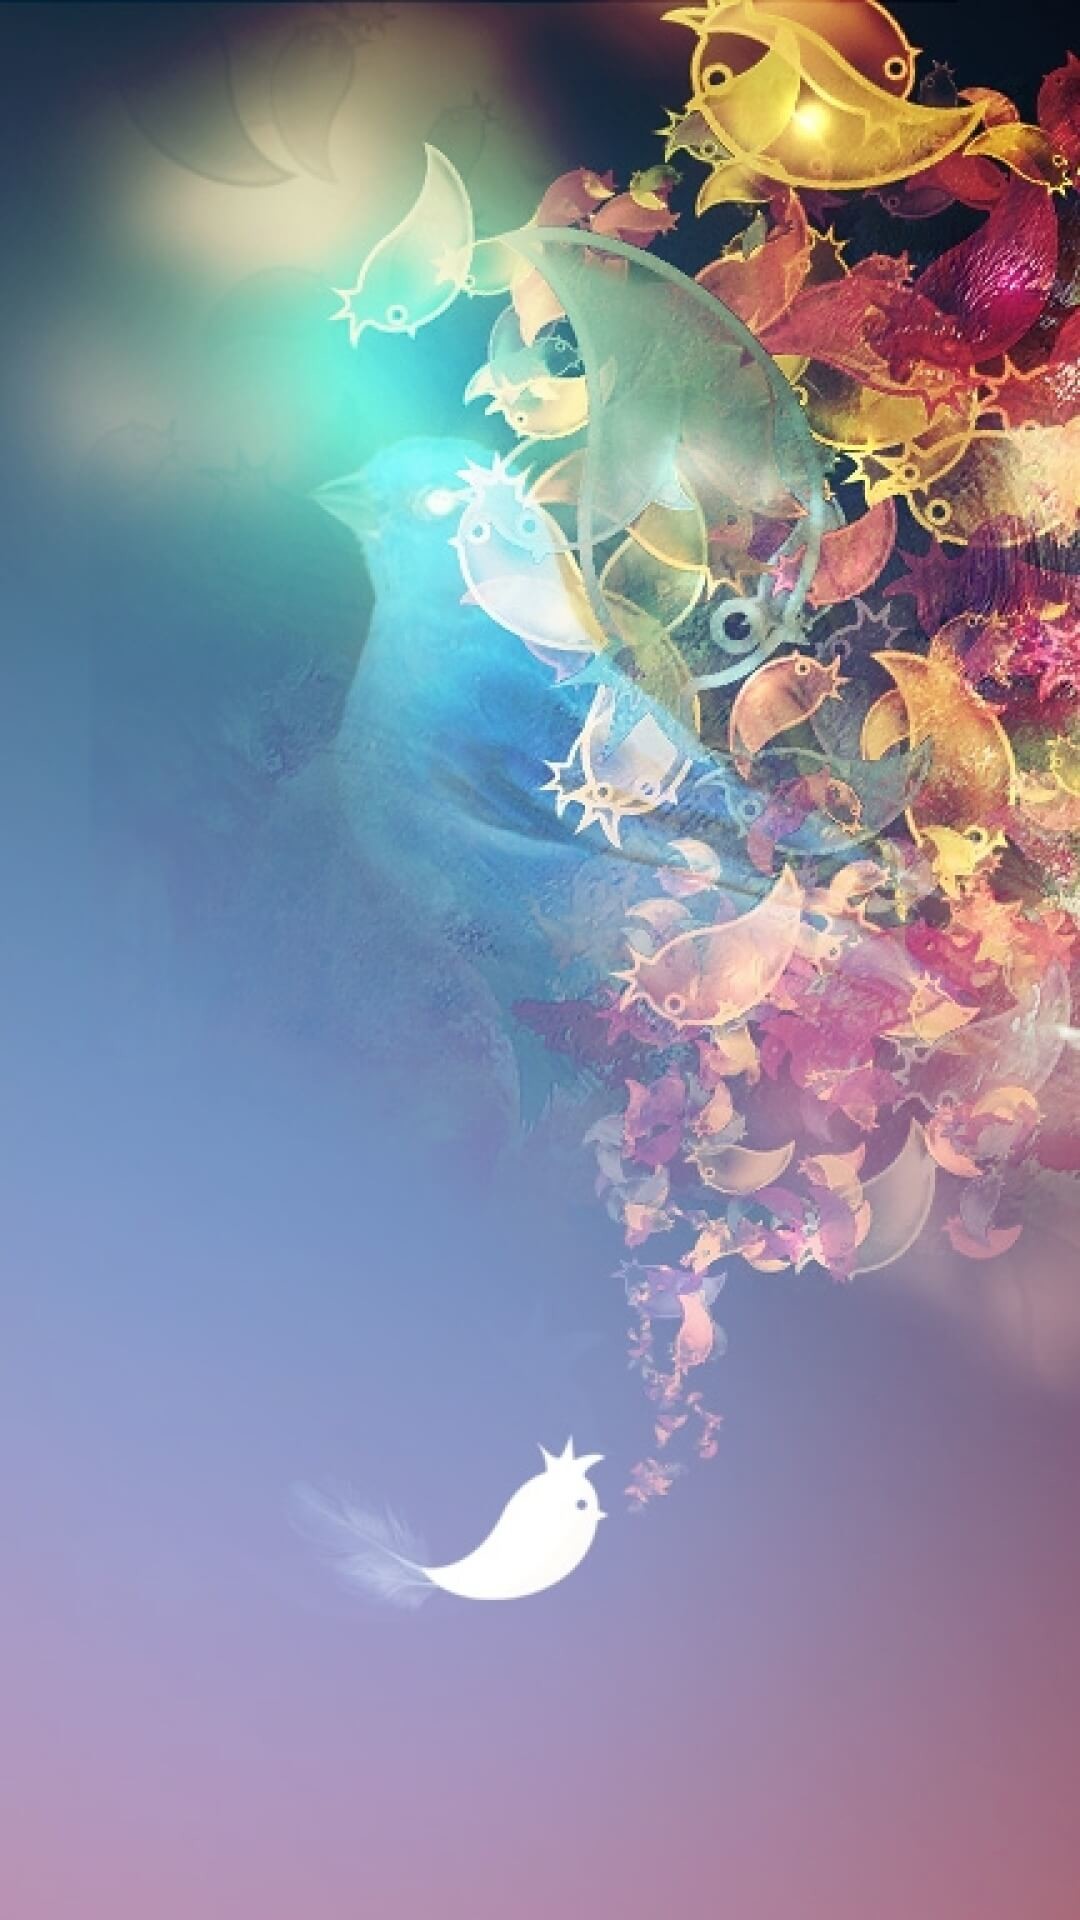 Flowers with birds abstract wallpaper